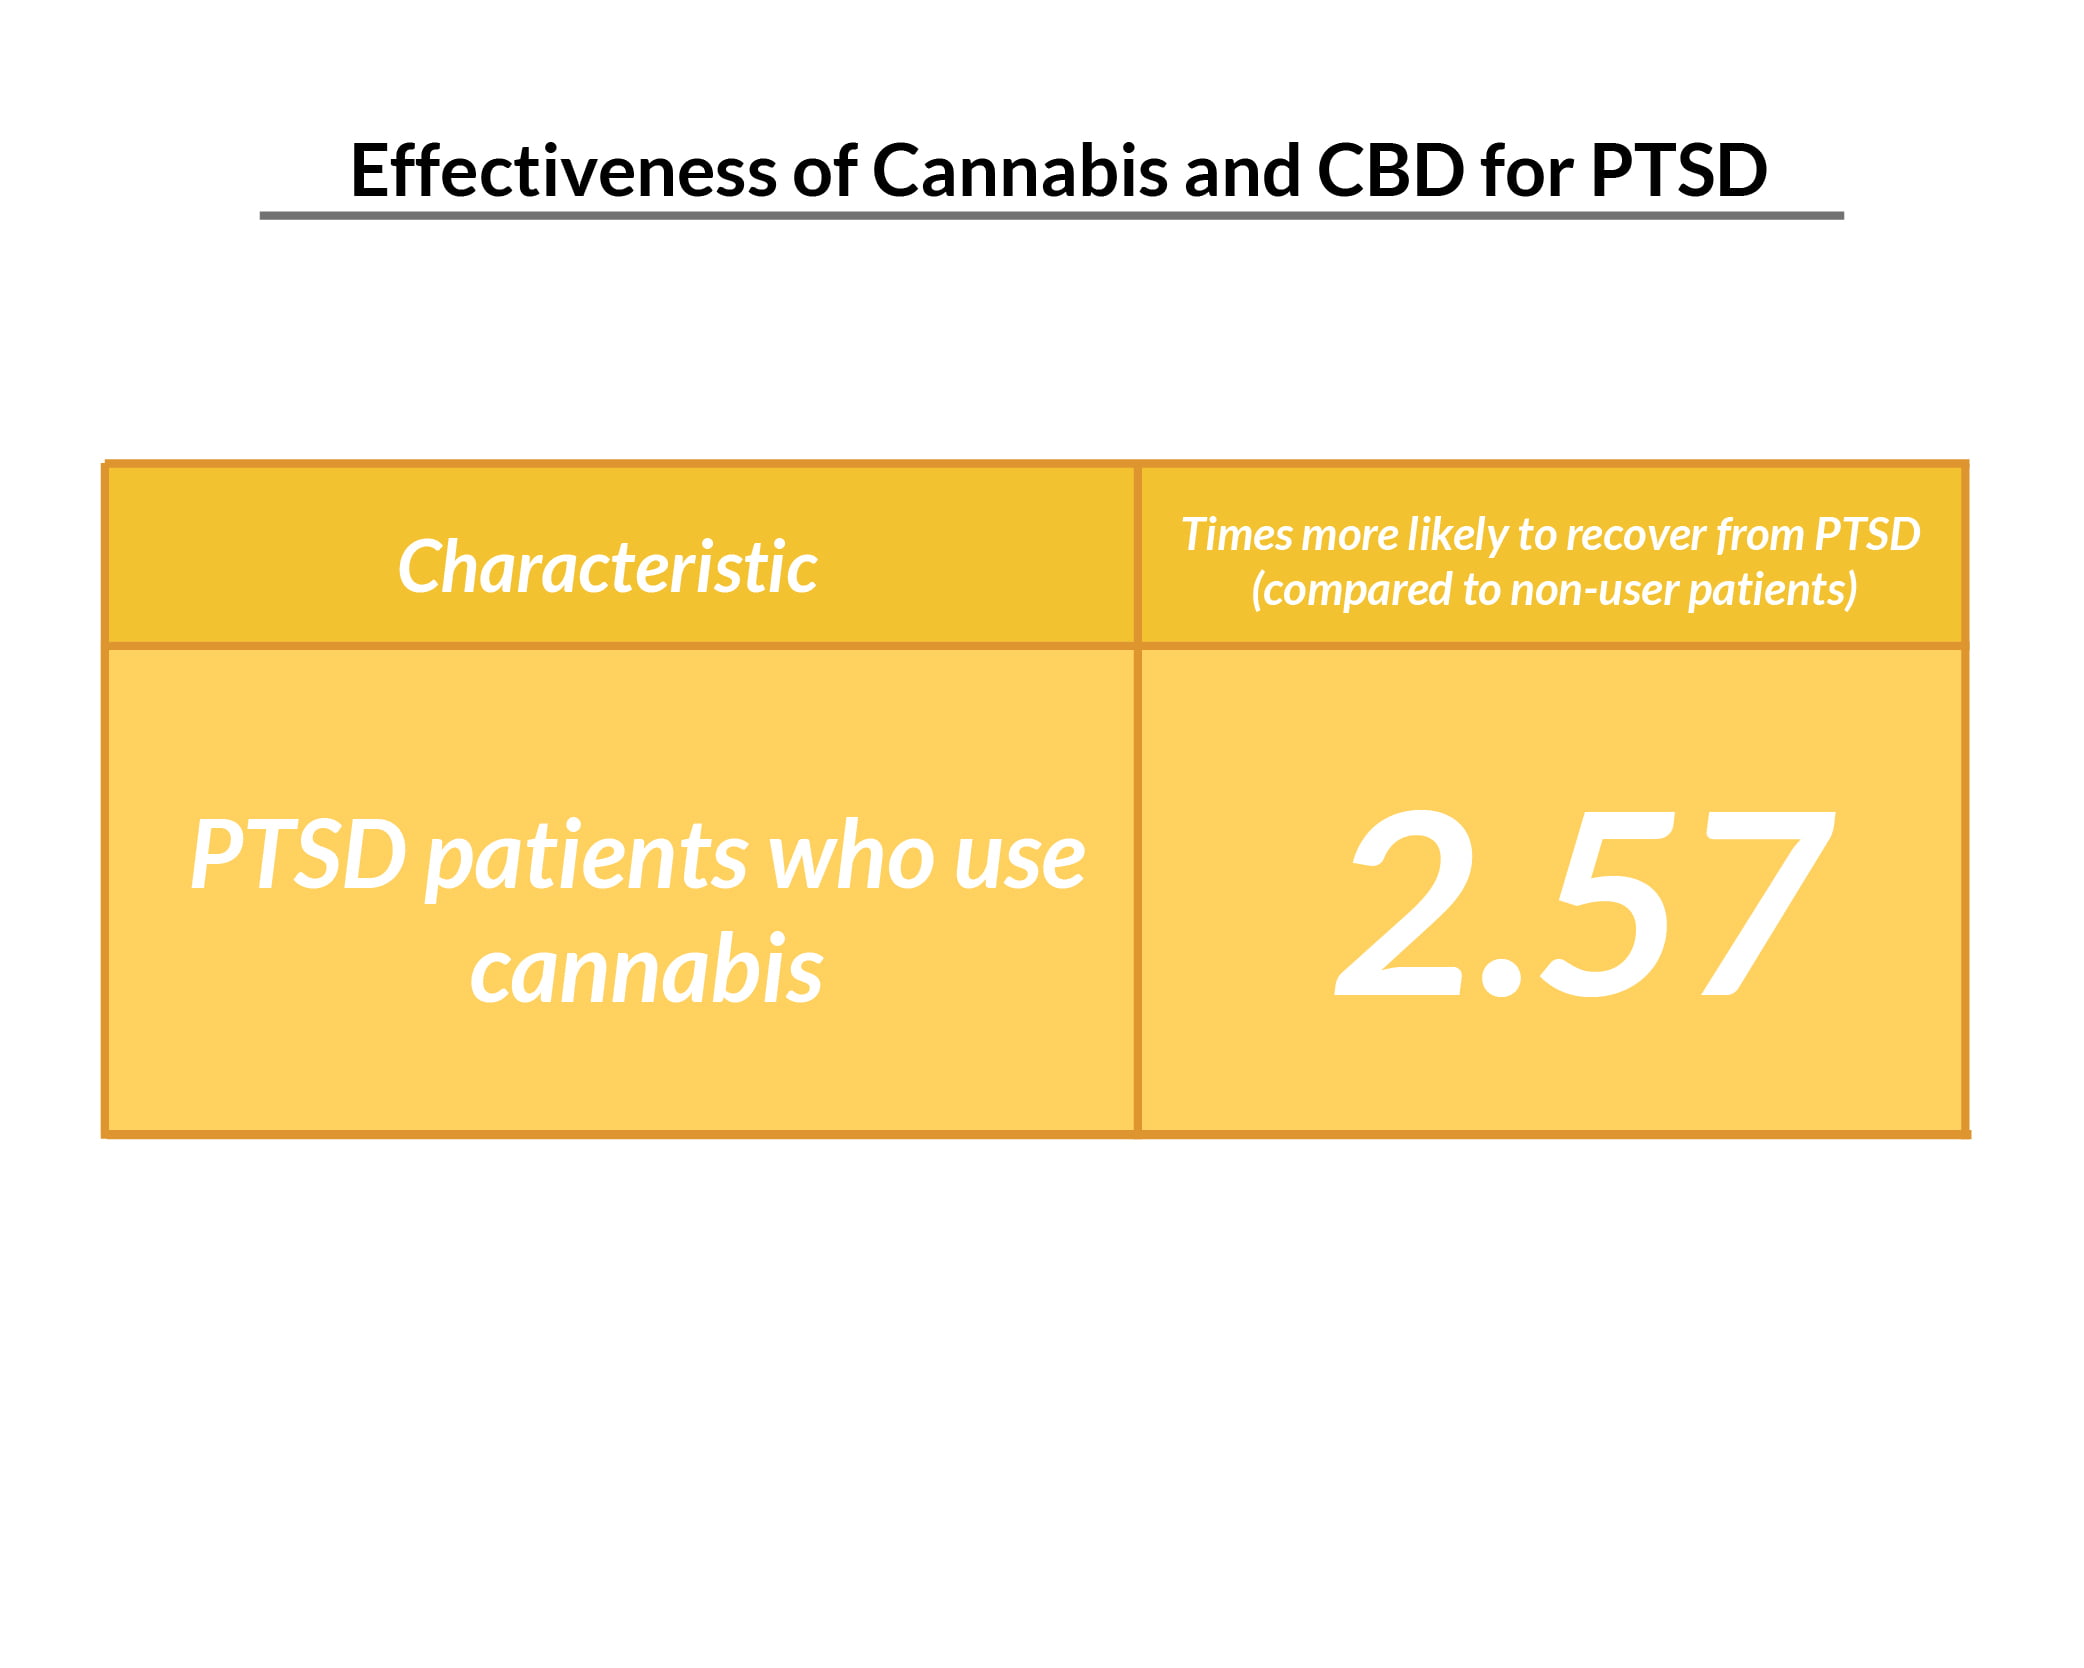 Chart of how effective of cannabis and CBD for PTSD